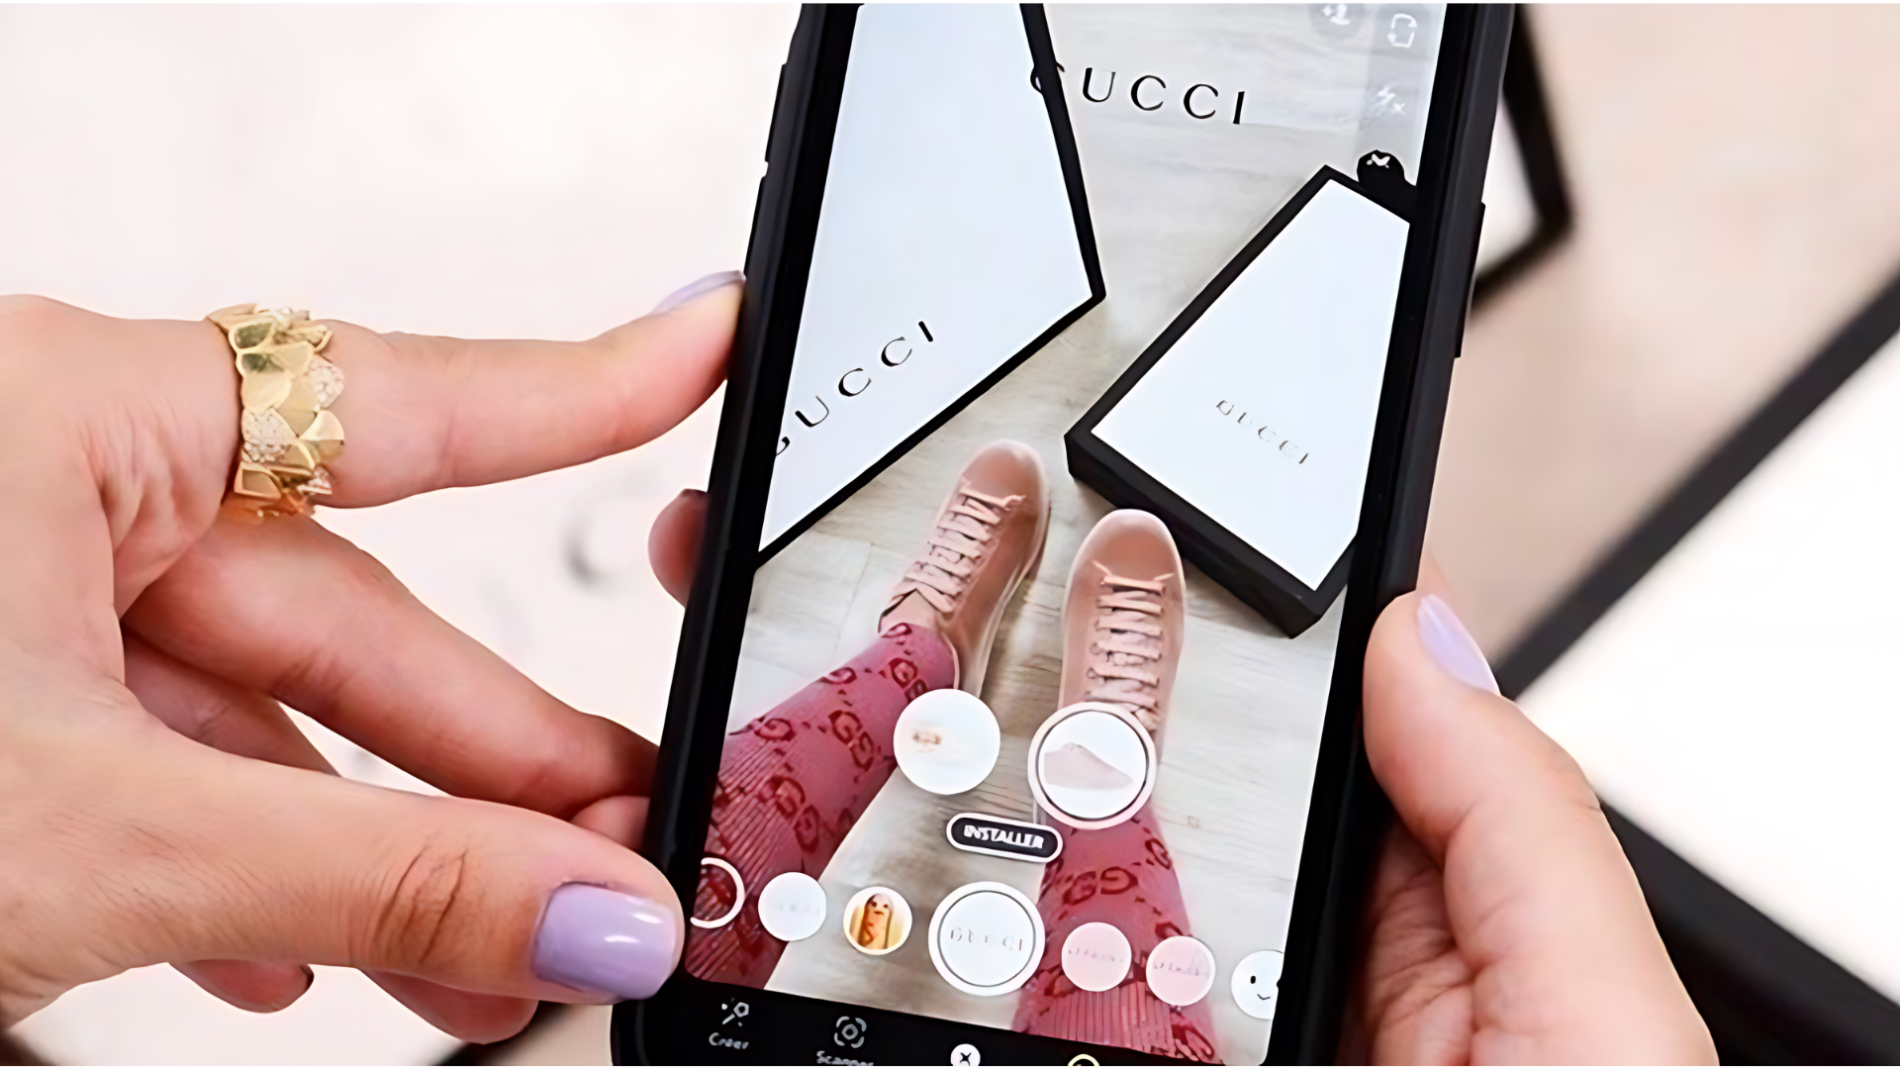 Exploring luxury fashion through a smartphone's augmented reality feature, with a user virtually trying on a pair of designer shoes.